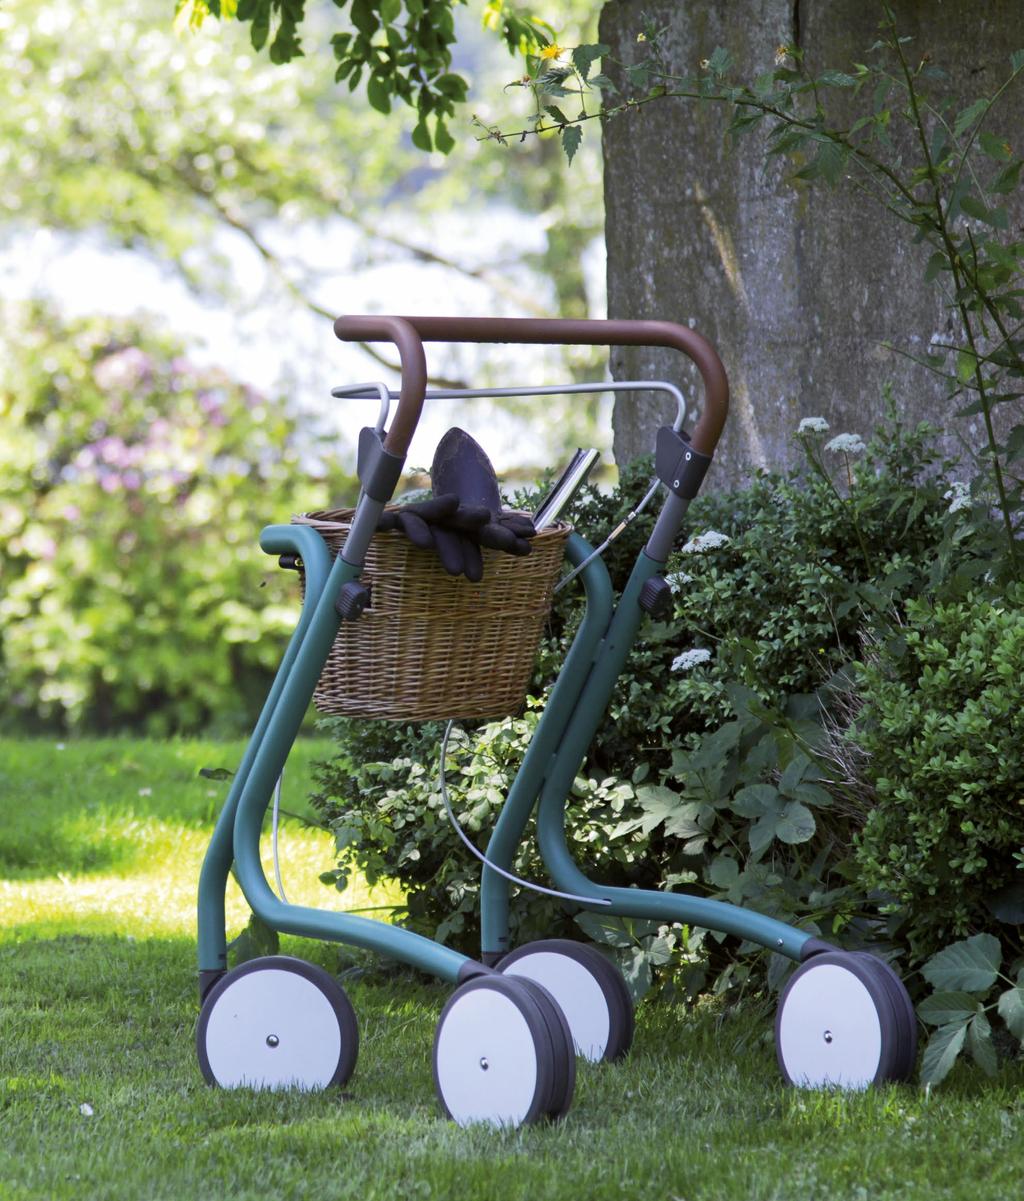 SCANDINAVIAN HOME RANGE SCANDINAVIAN GARDENER This rollator has similar design as the Scandinavian Butler, but it is meant to support with daily chores around the house, such as weeding the garden,